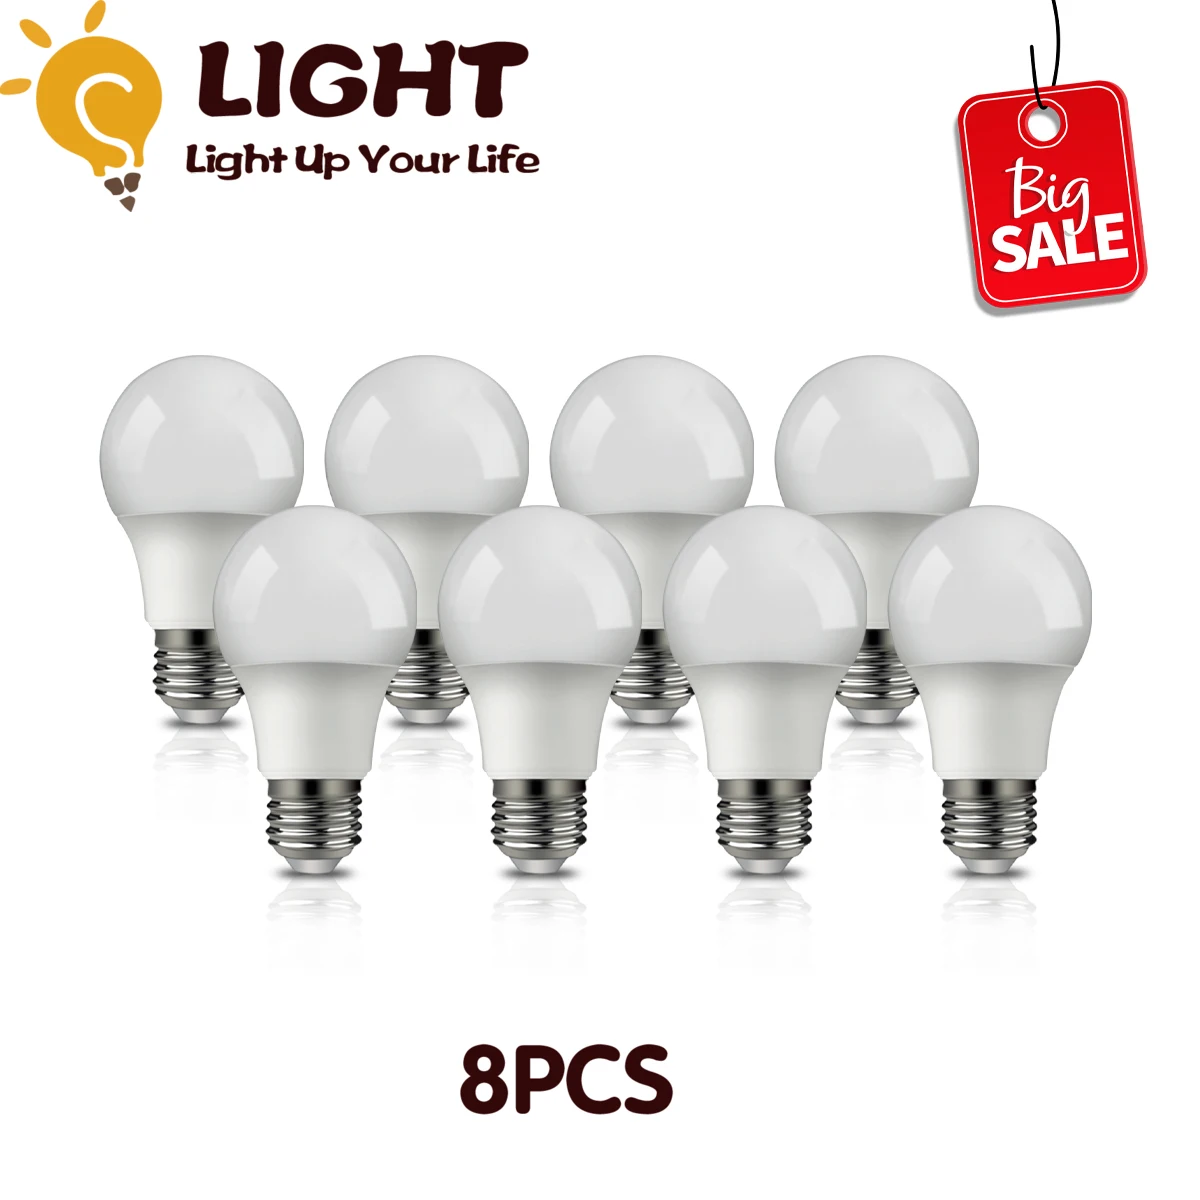 Promotion LED Bulb A60 9W 8pcs E27 B22 3000K/6000K Warm White/Cold WhiteIndoor Home Office Lighting Lamp Non Dimmable Bulb